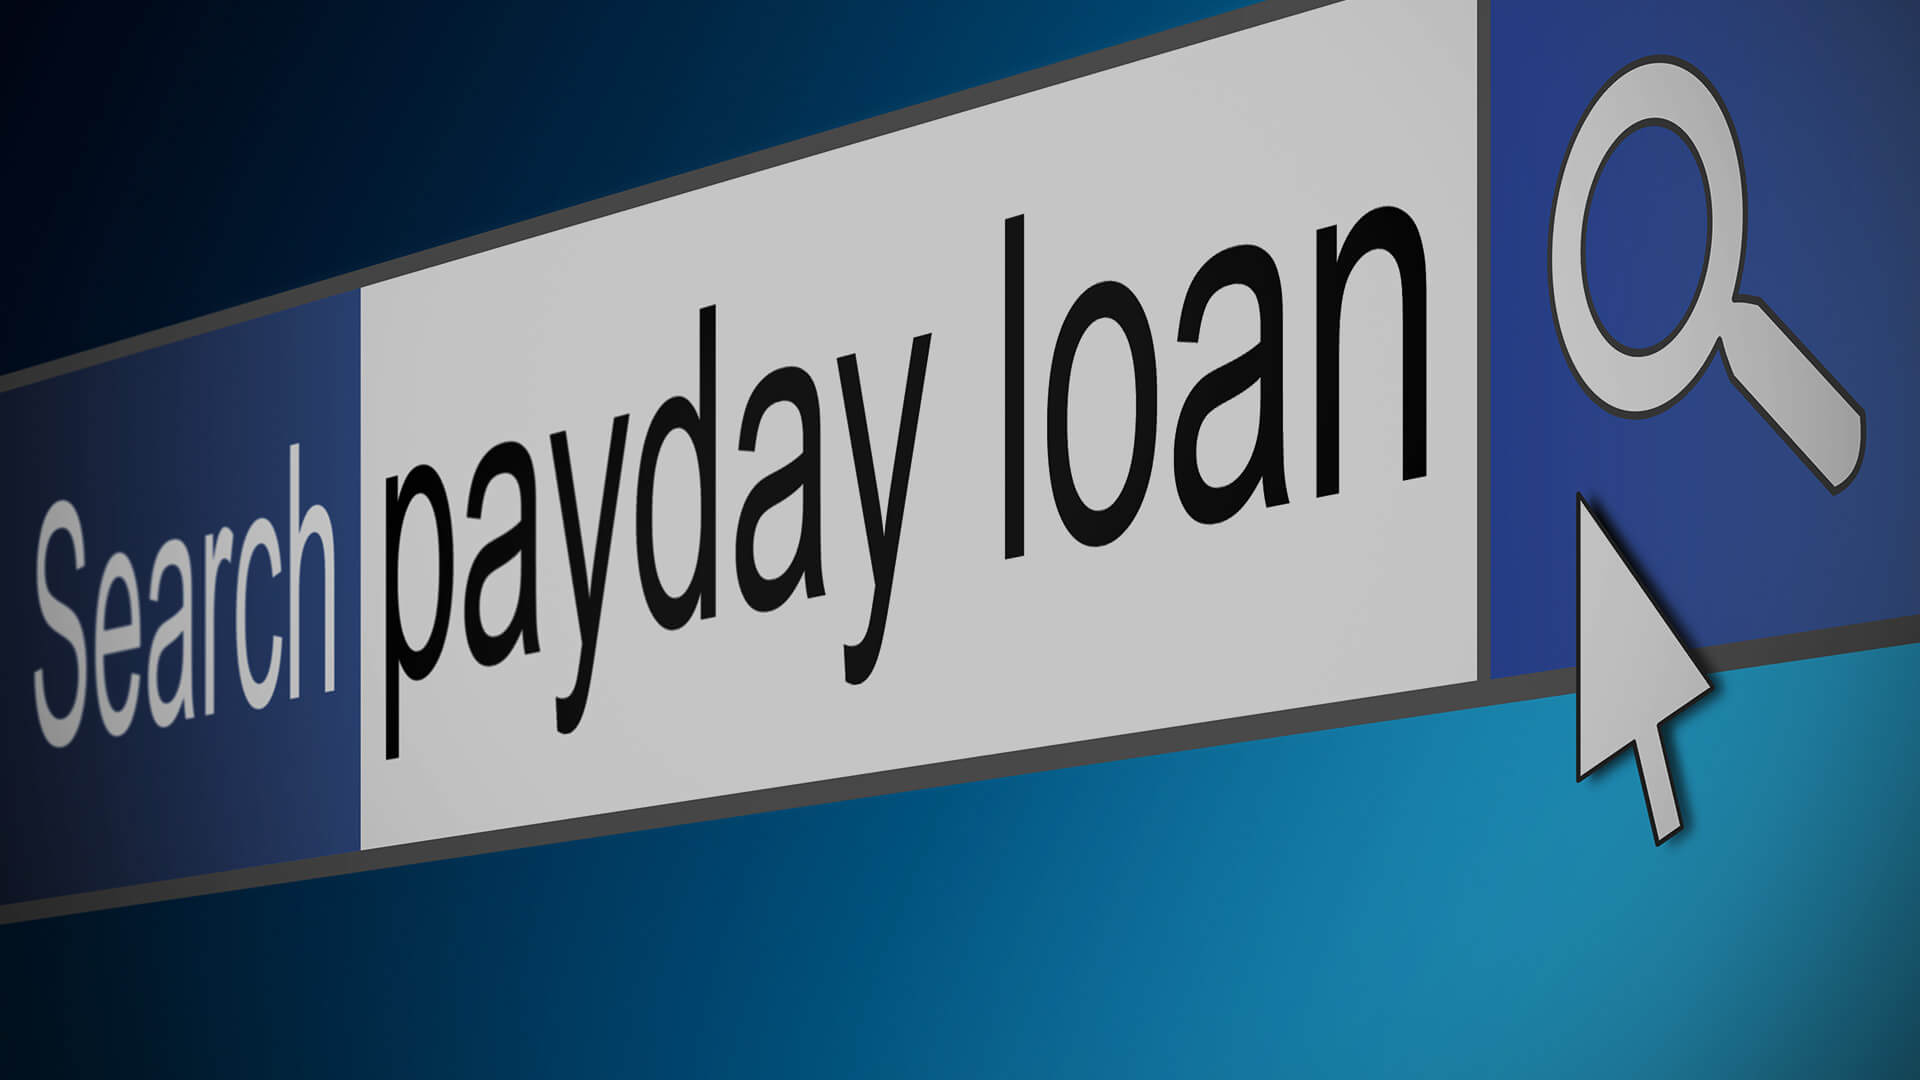 payday-loan-ss-1920